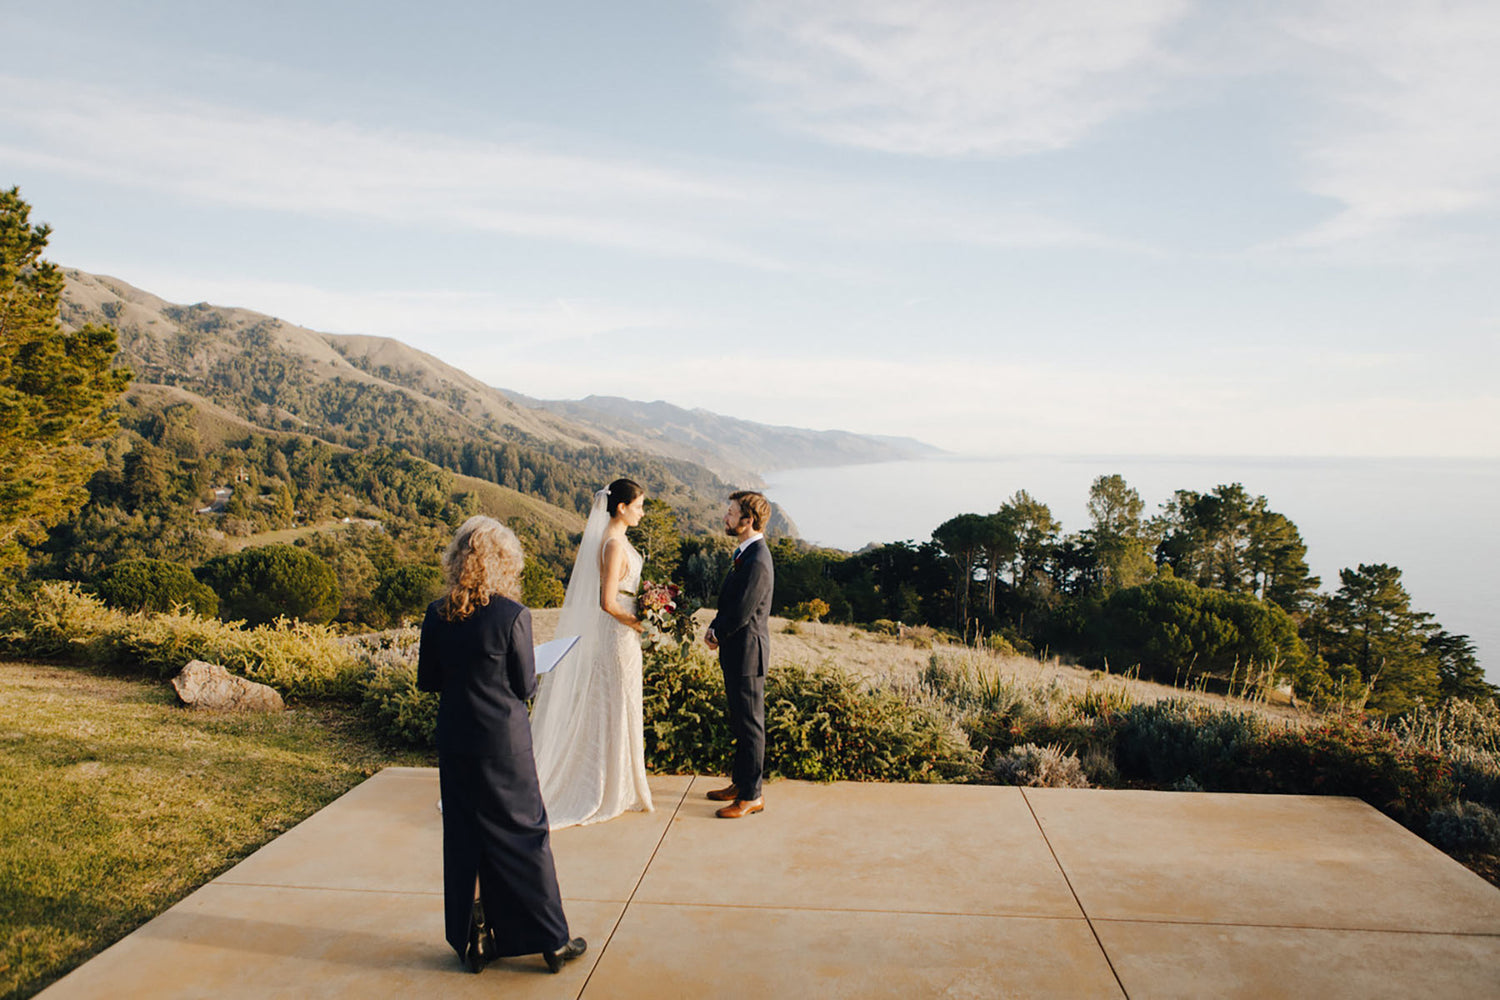 Bride holding bouquet made by Big Sur florist during elopement overlooking the ocean at Post Ranch Inn